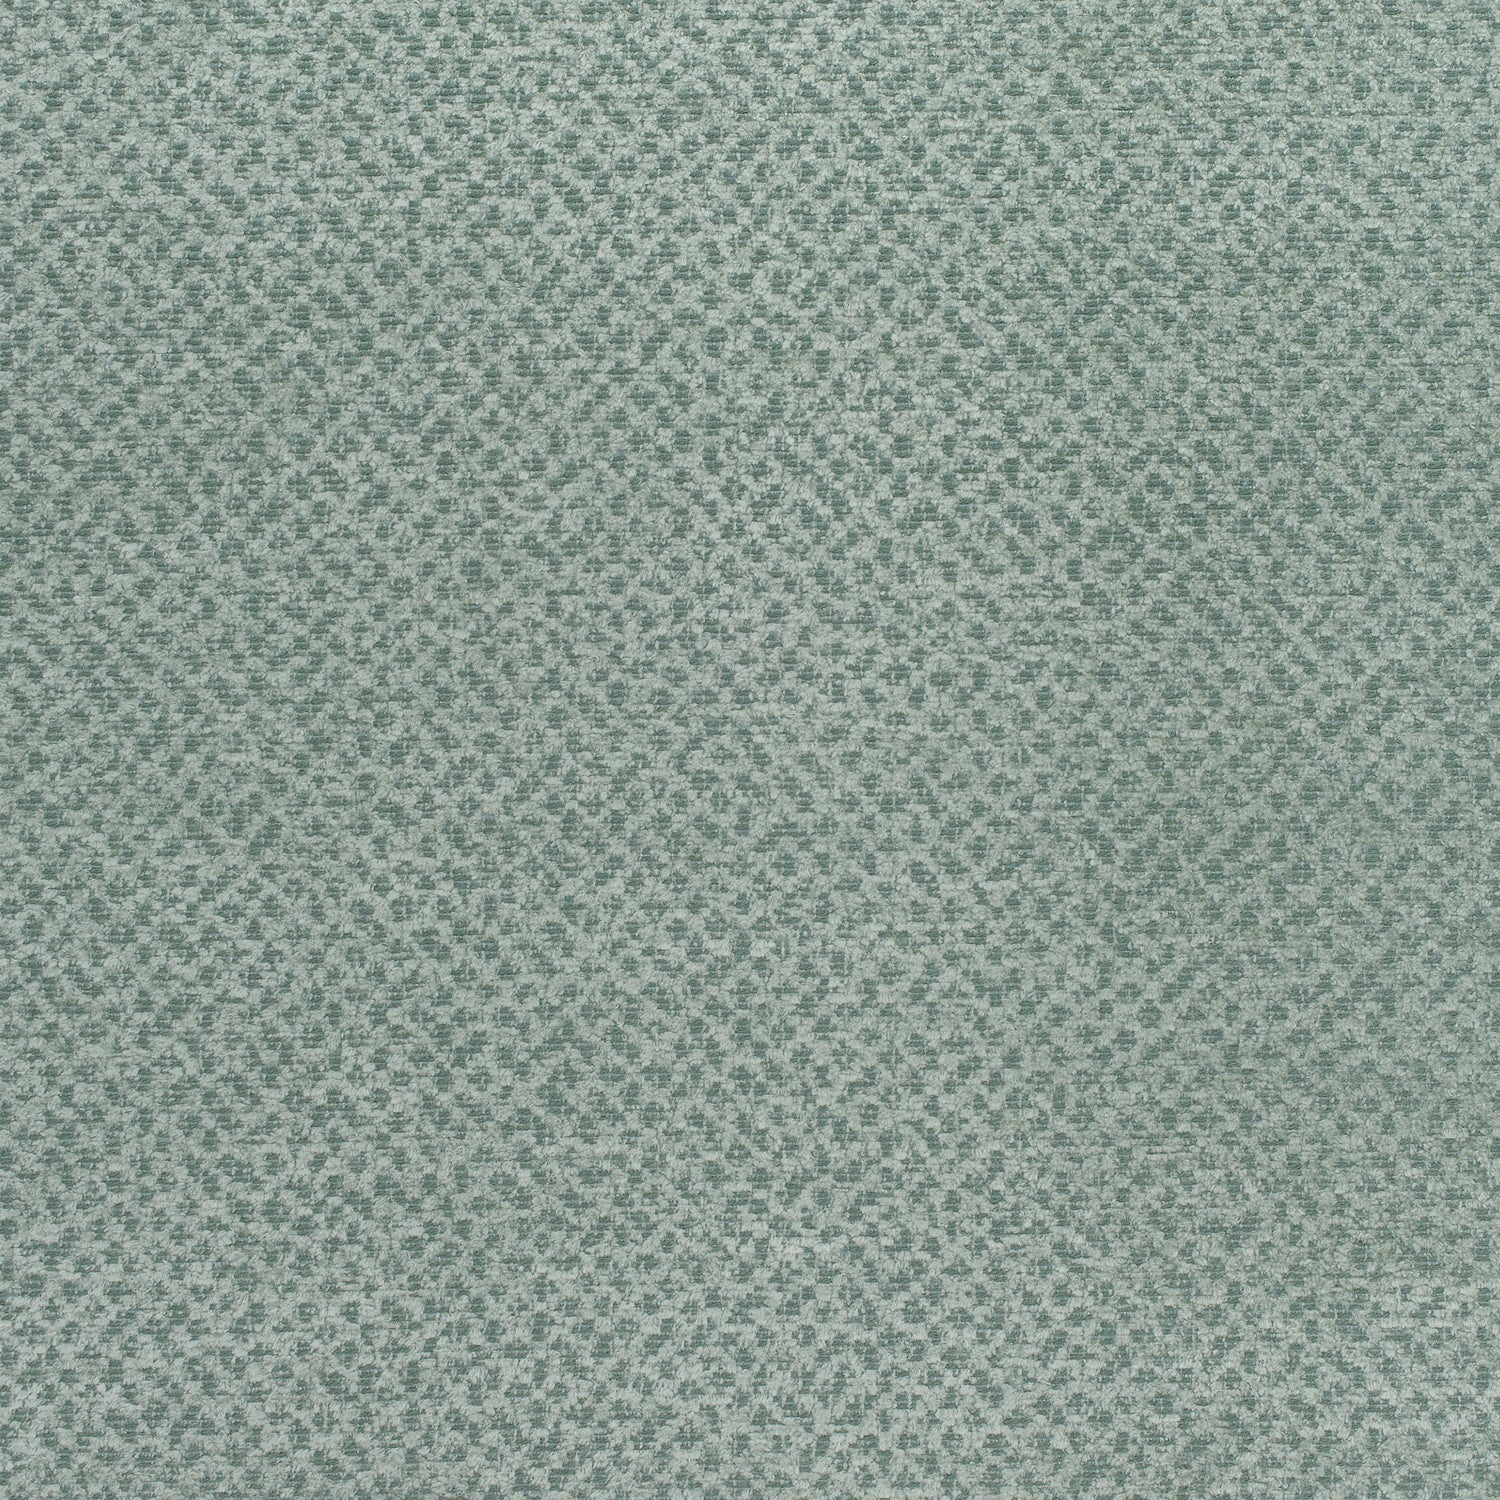 Gryffin fabric in sea glass color - pattern number W80412 - by Thibaut in the Mosaic collection